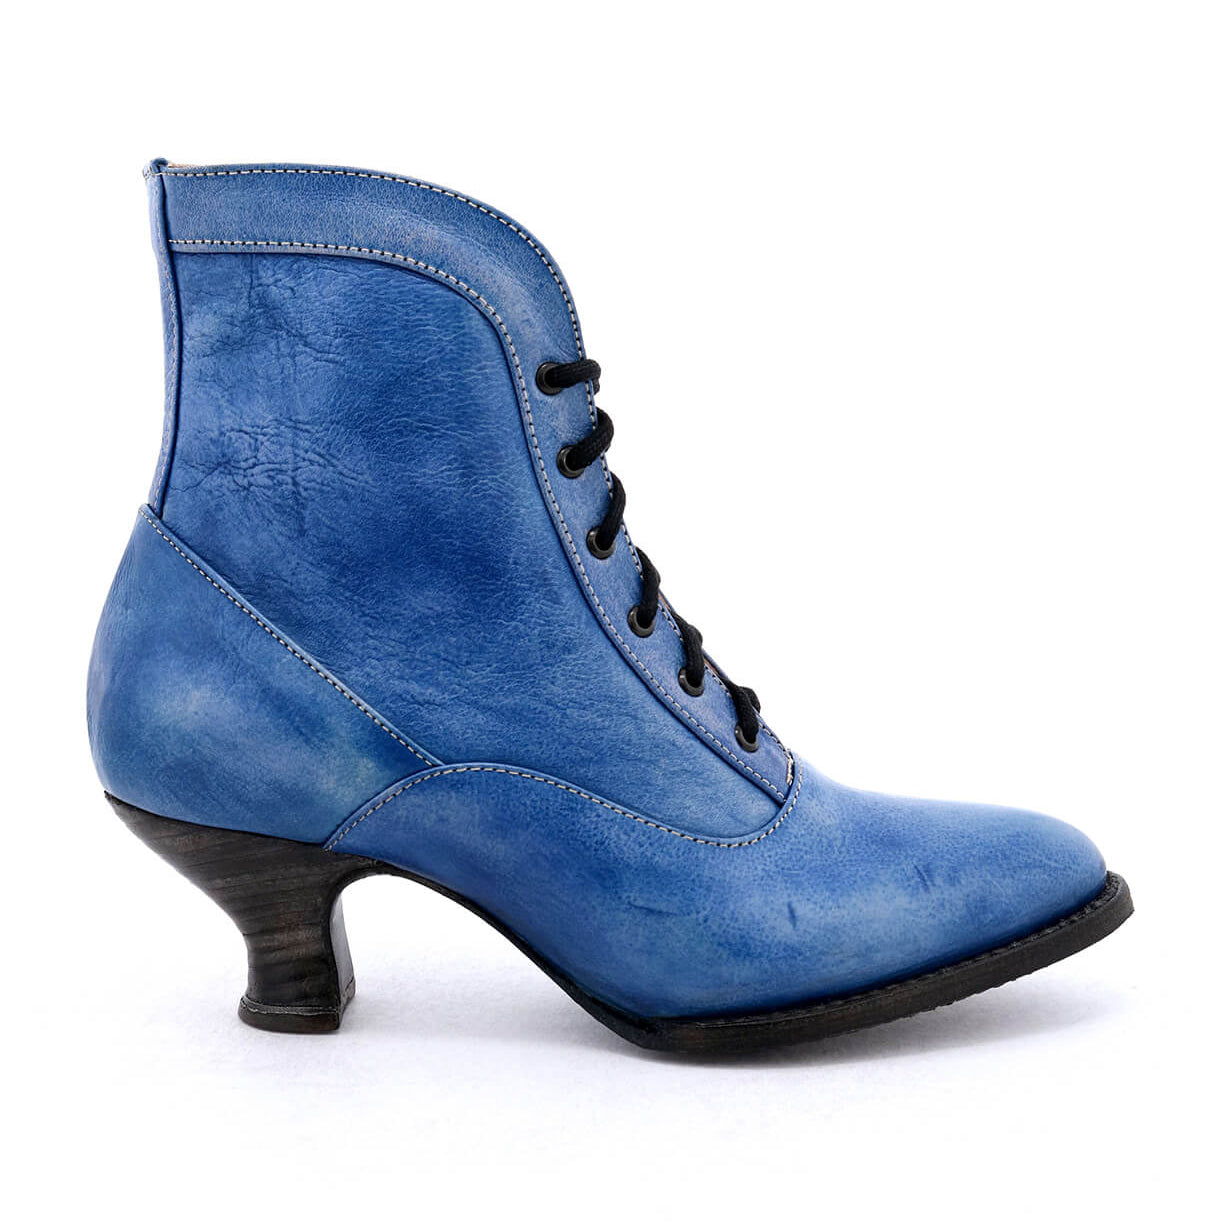 An Oak Tree Farms Jacquelyn handcrafted women's blue leather ankle boot with a leather welted outsole, on a white background.